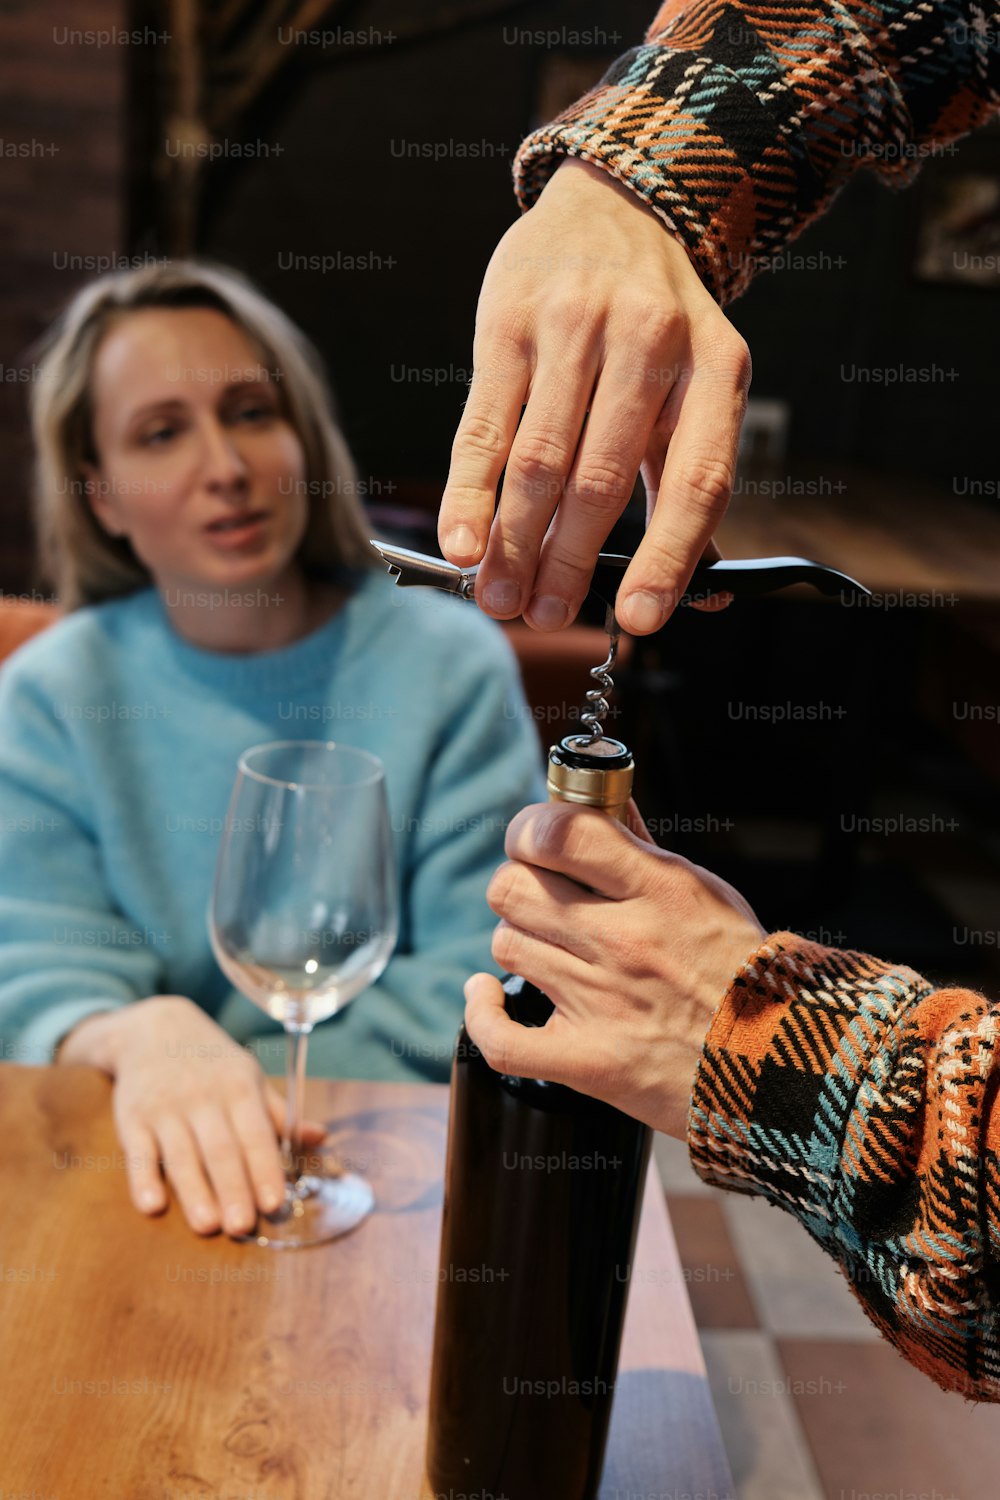 a woman is pouring wine into a wine glass